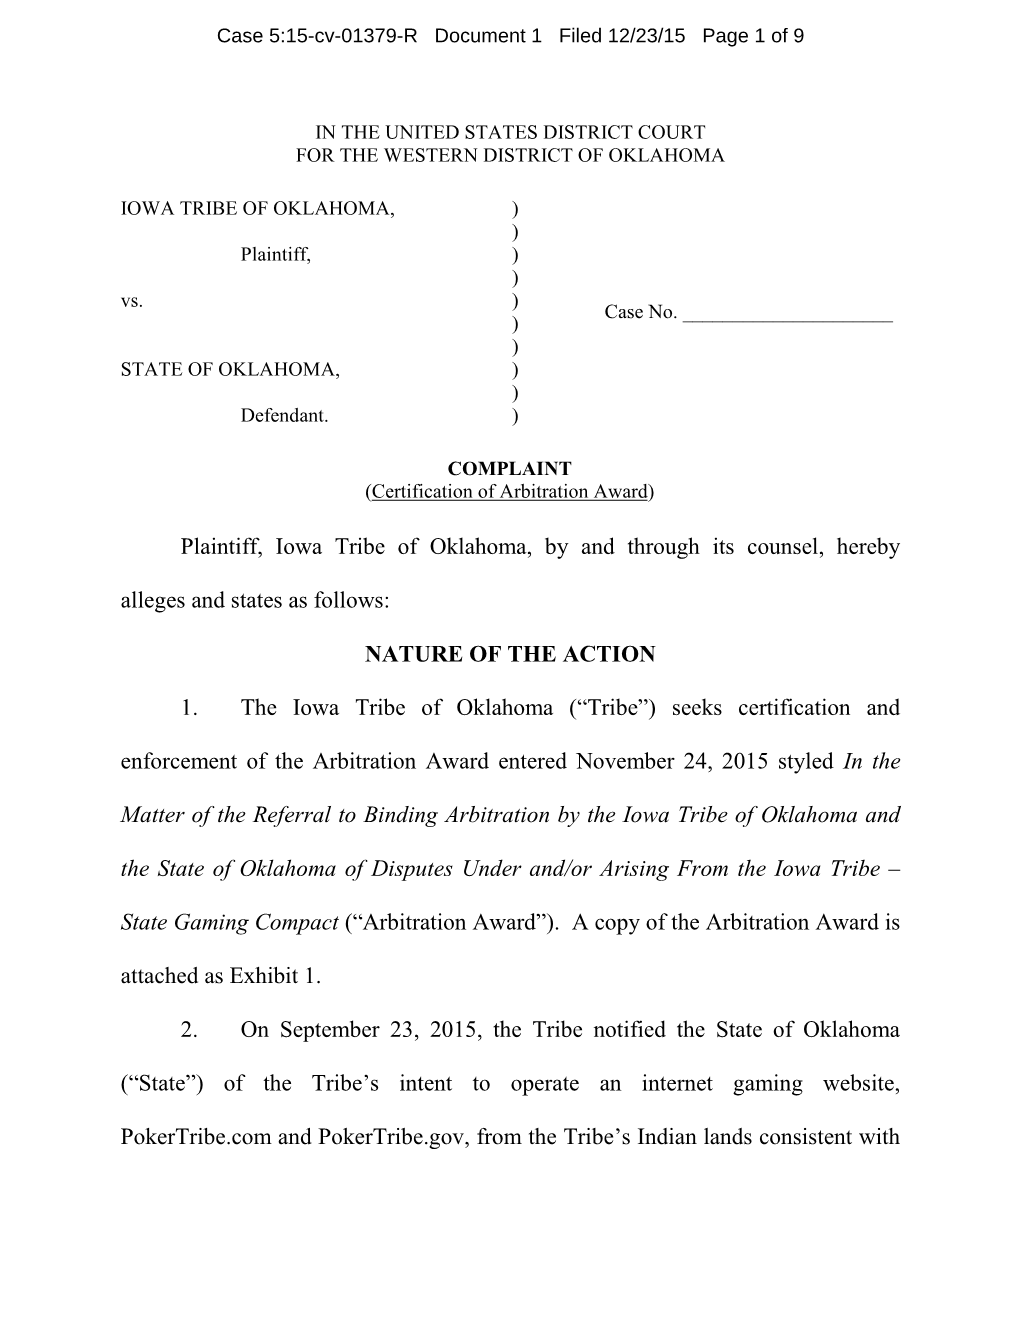 Plaintiff, Iowa Tribe of Oklahoma, by and Through Its Counsel, Hereby Alleges and States As Follows